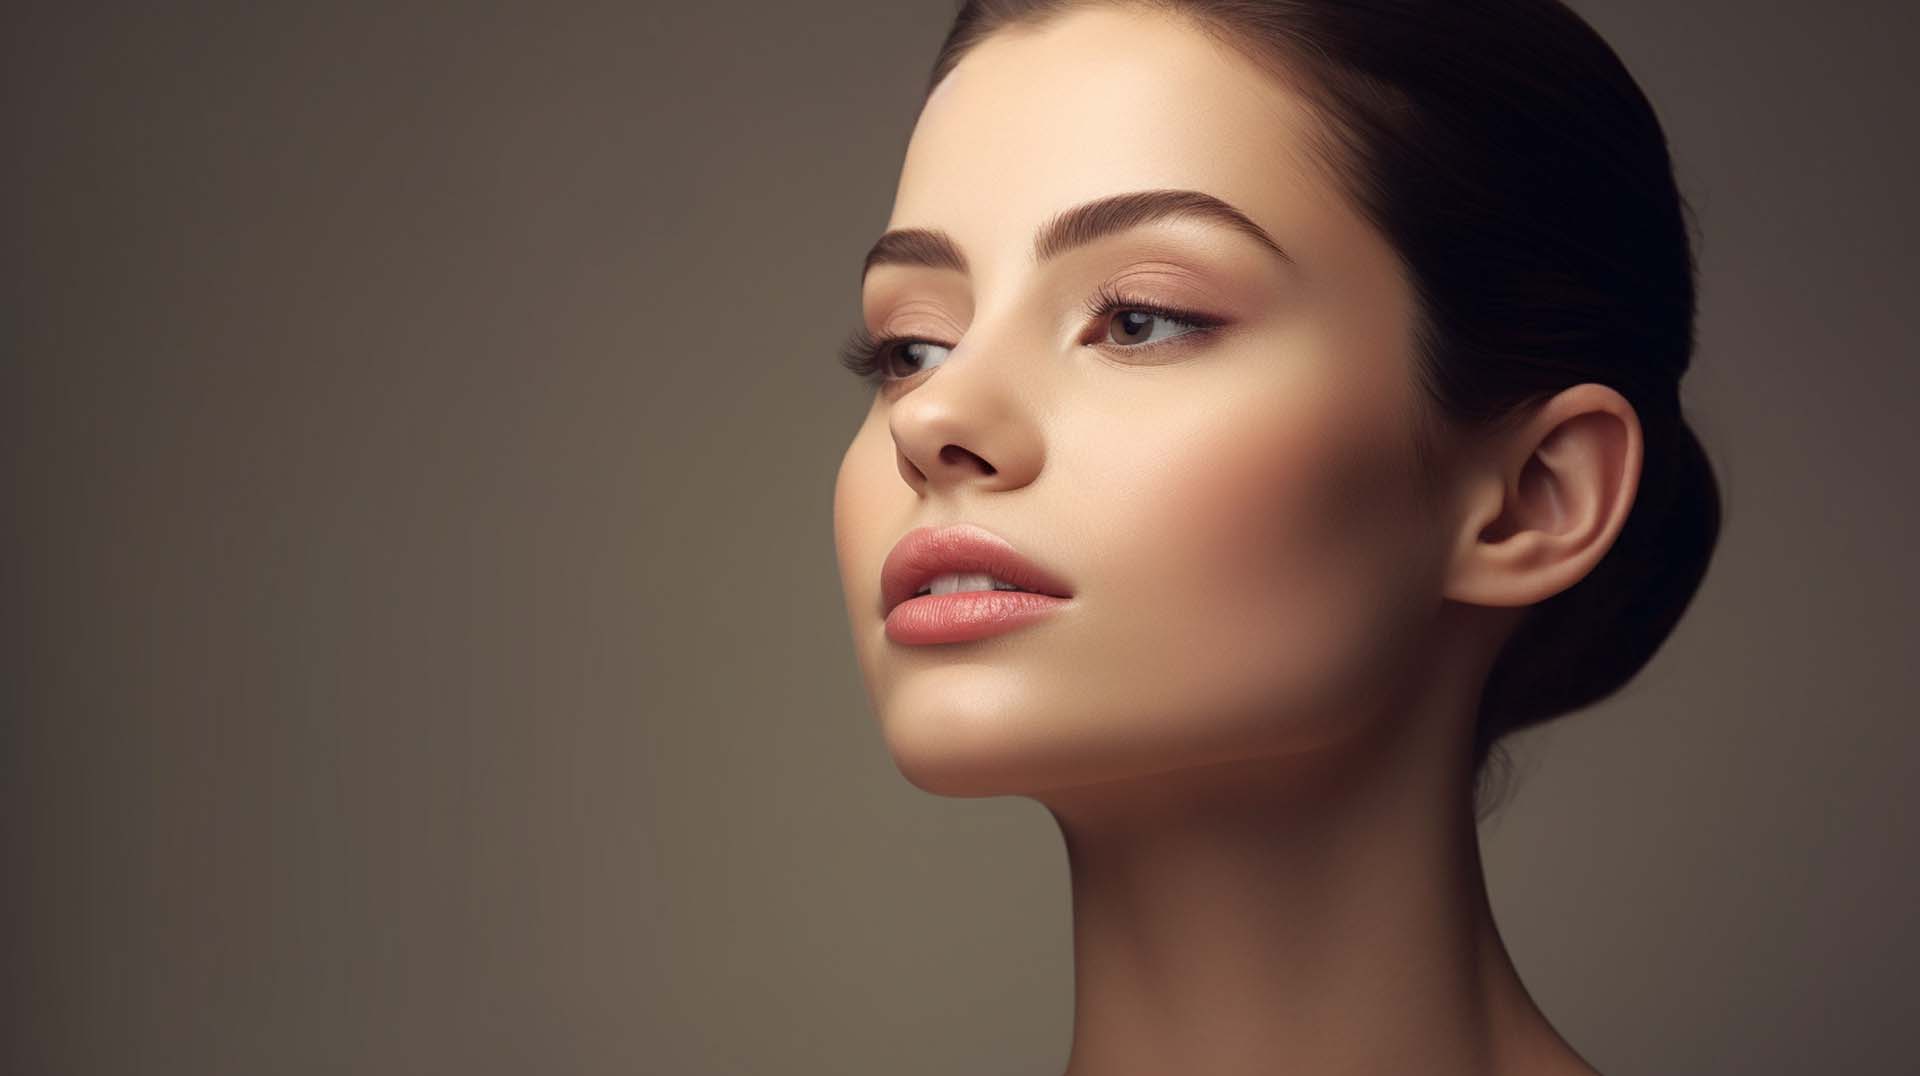 Neck Lift Surgery near me in Ingersoll, Ontario